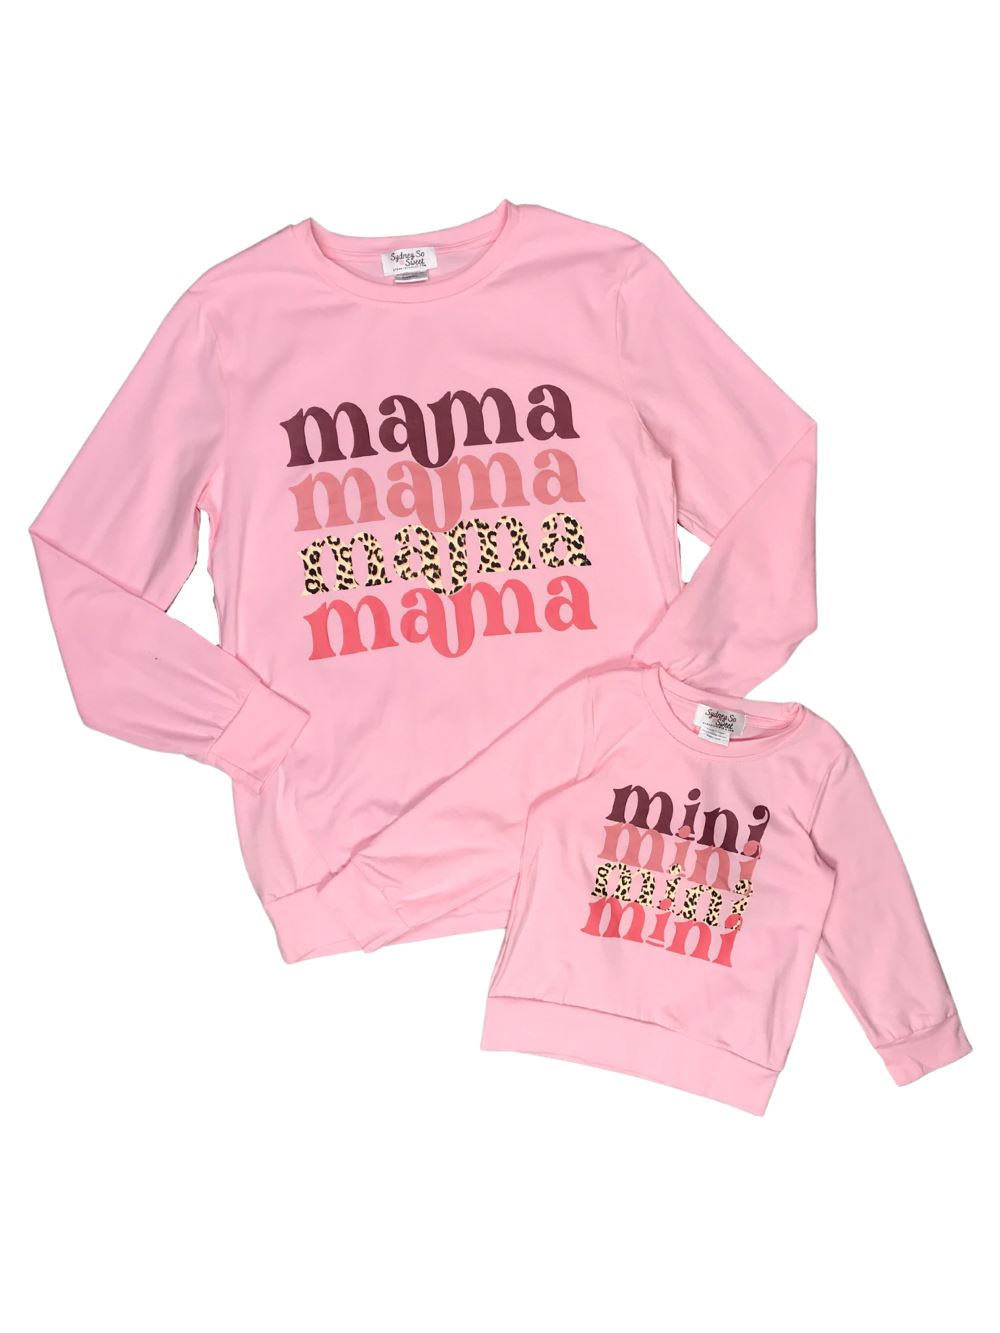 Mommy and Me - Mama & Mini Pink Cheetah Matching Tops